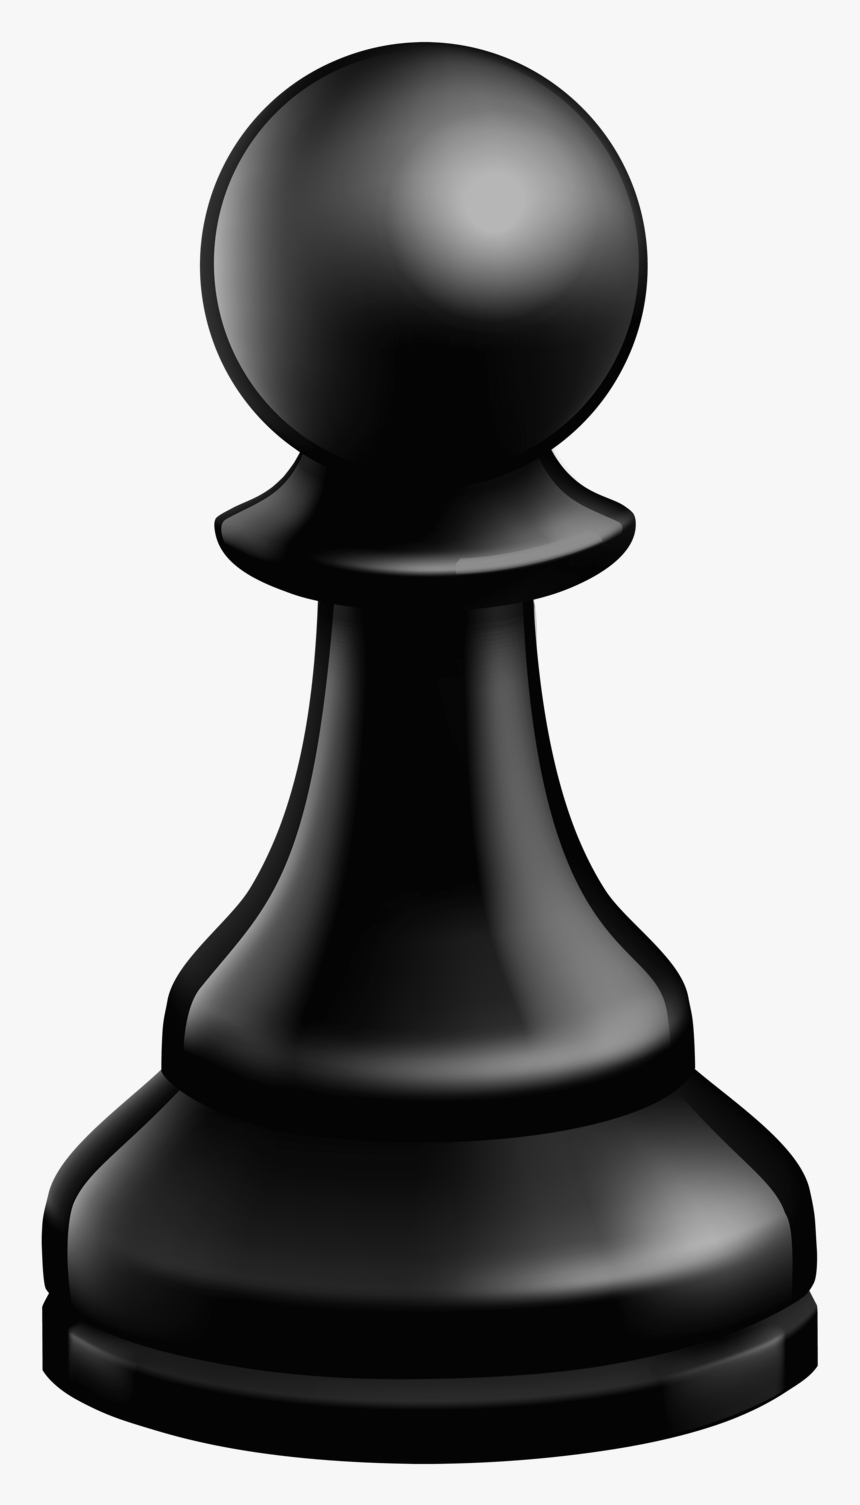 Pawn Black Chess Piece - Transparent Background Chess Pieces Clipart, HD Png Download, Free Download